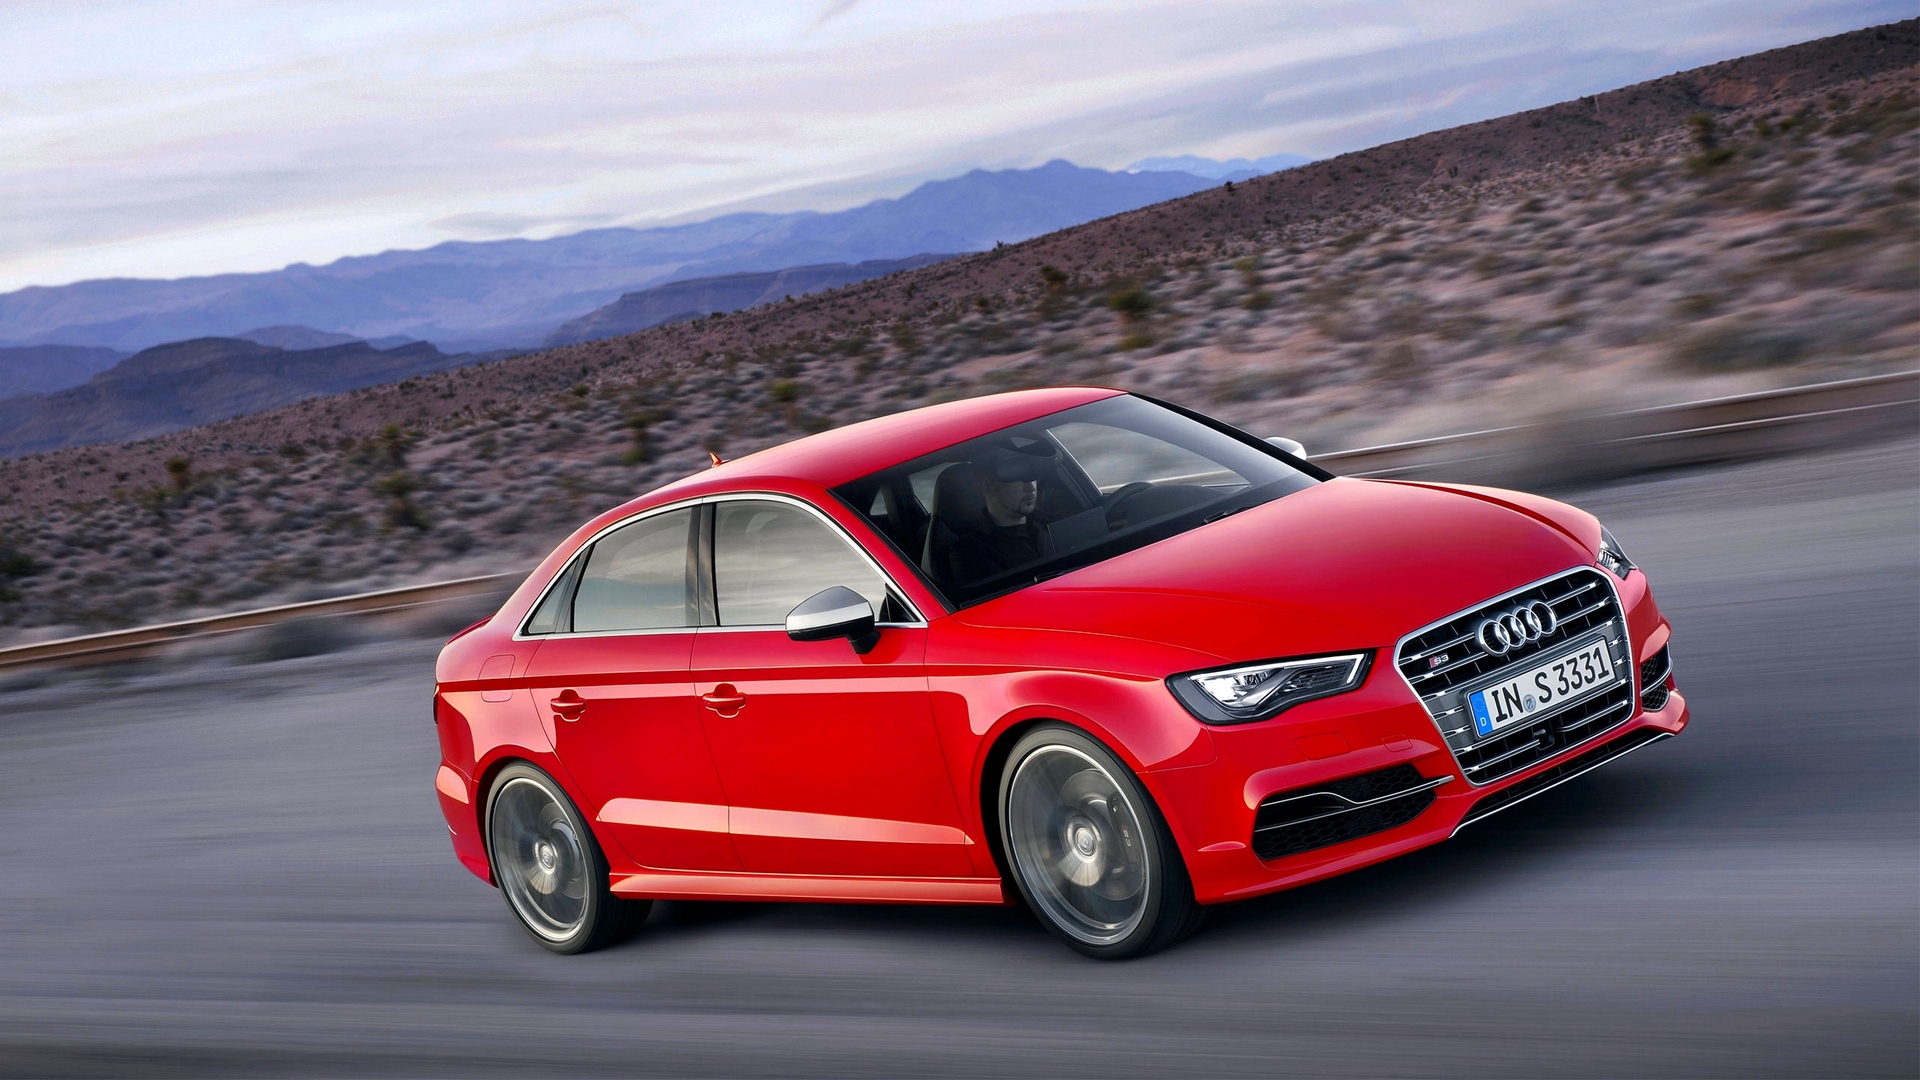 Download wallpaper 1920x1080 audi s3 red side view full hd 1920x1080